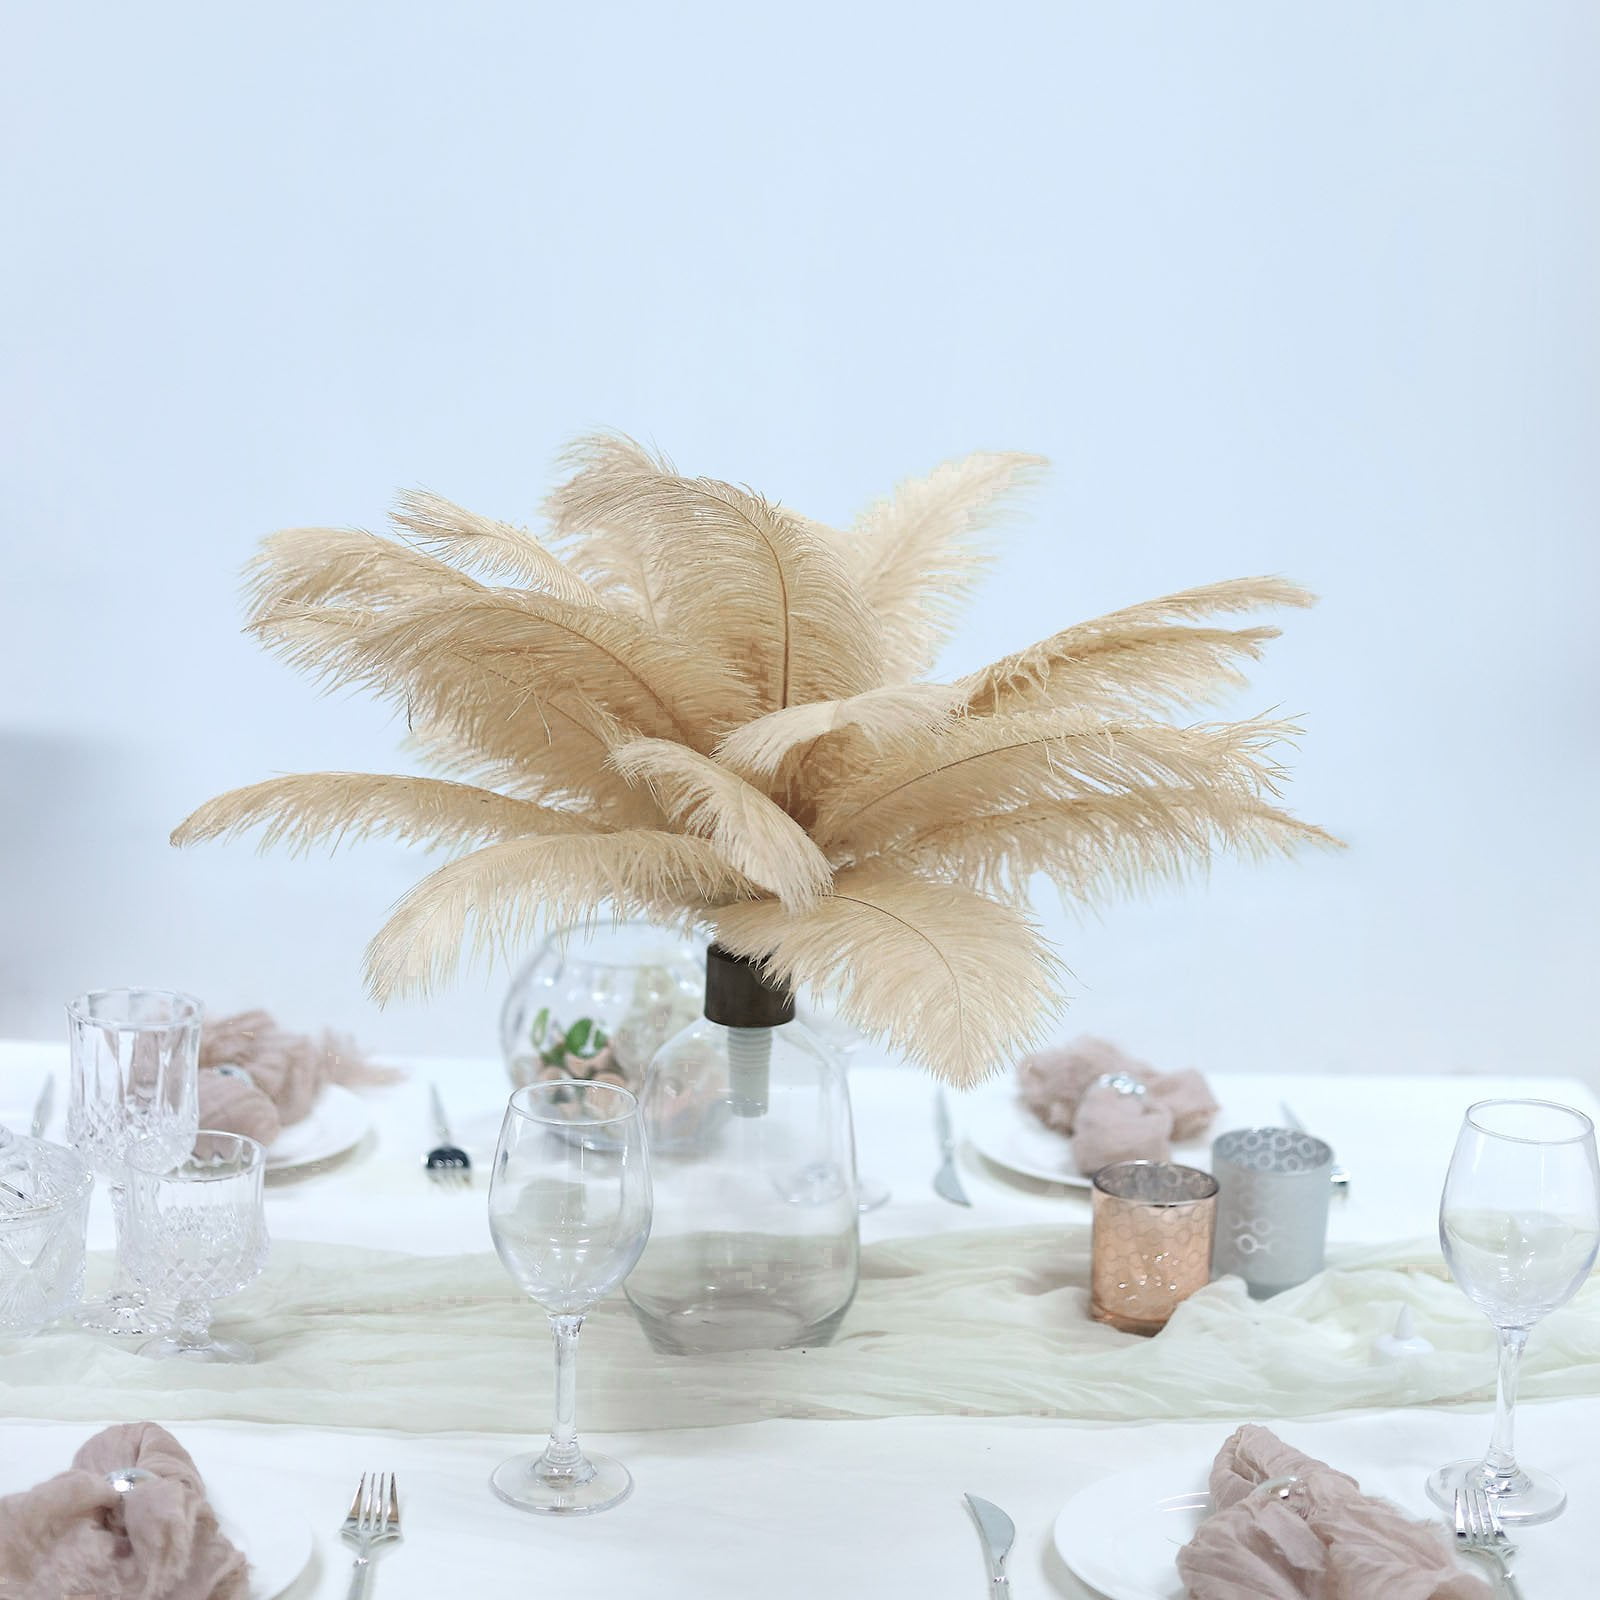 Complete Feather Centerpiece With 16 Vase (Apricot) for Sale Online